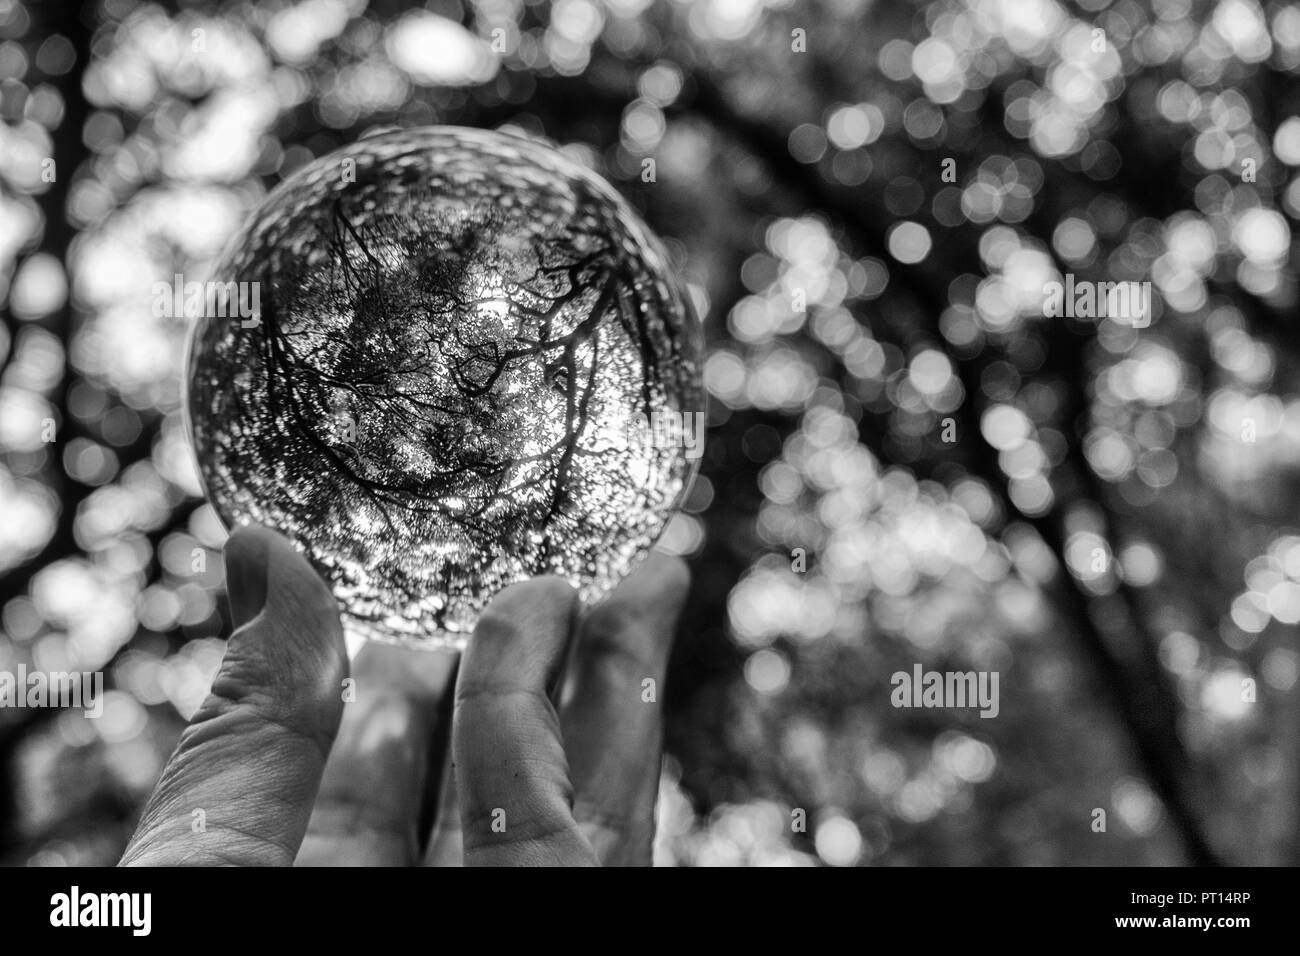 Black and white abstract image of tree branches and leaves captured in focus in glass ball held in fingertips showing design and contrast in nature Stock Photo